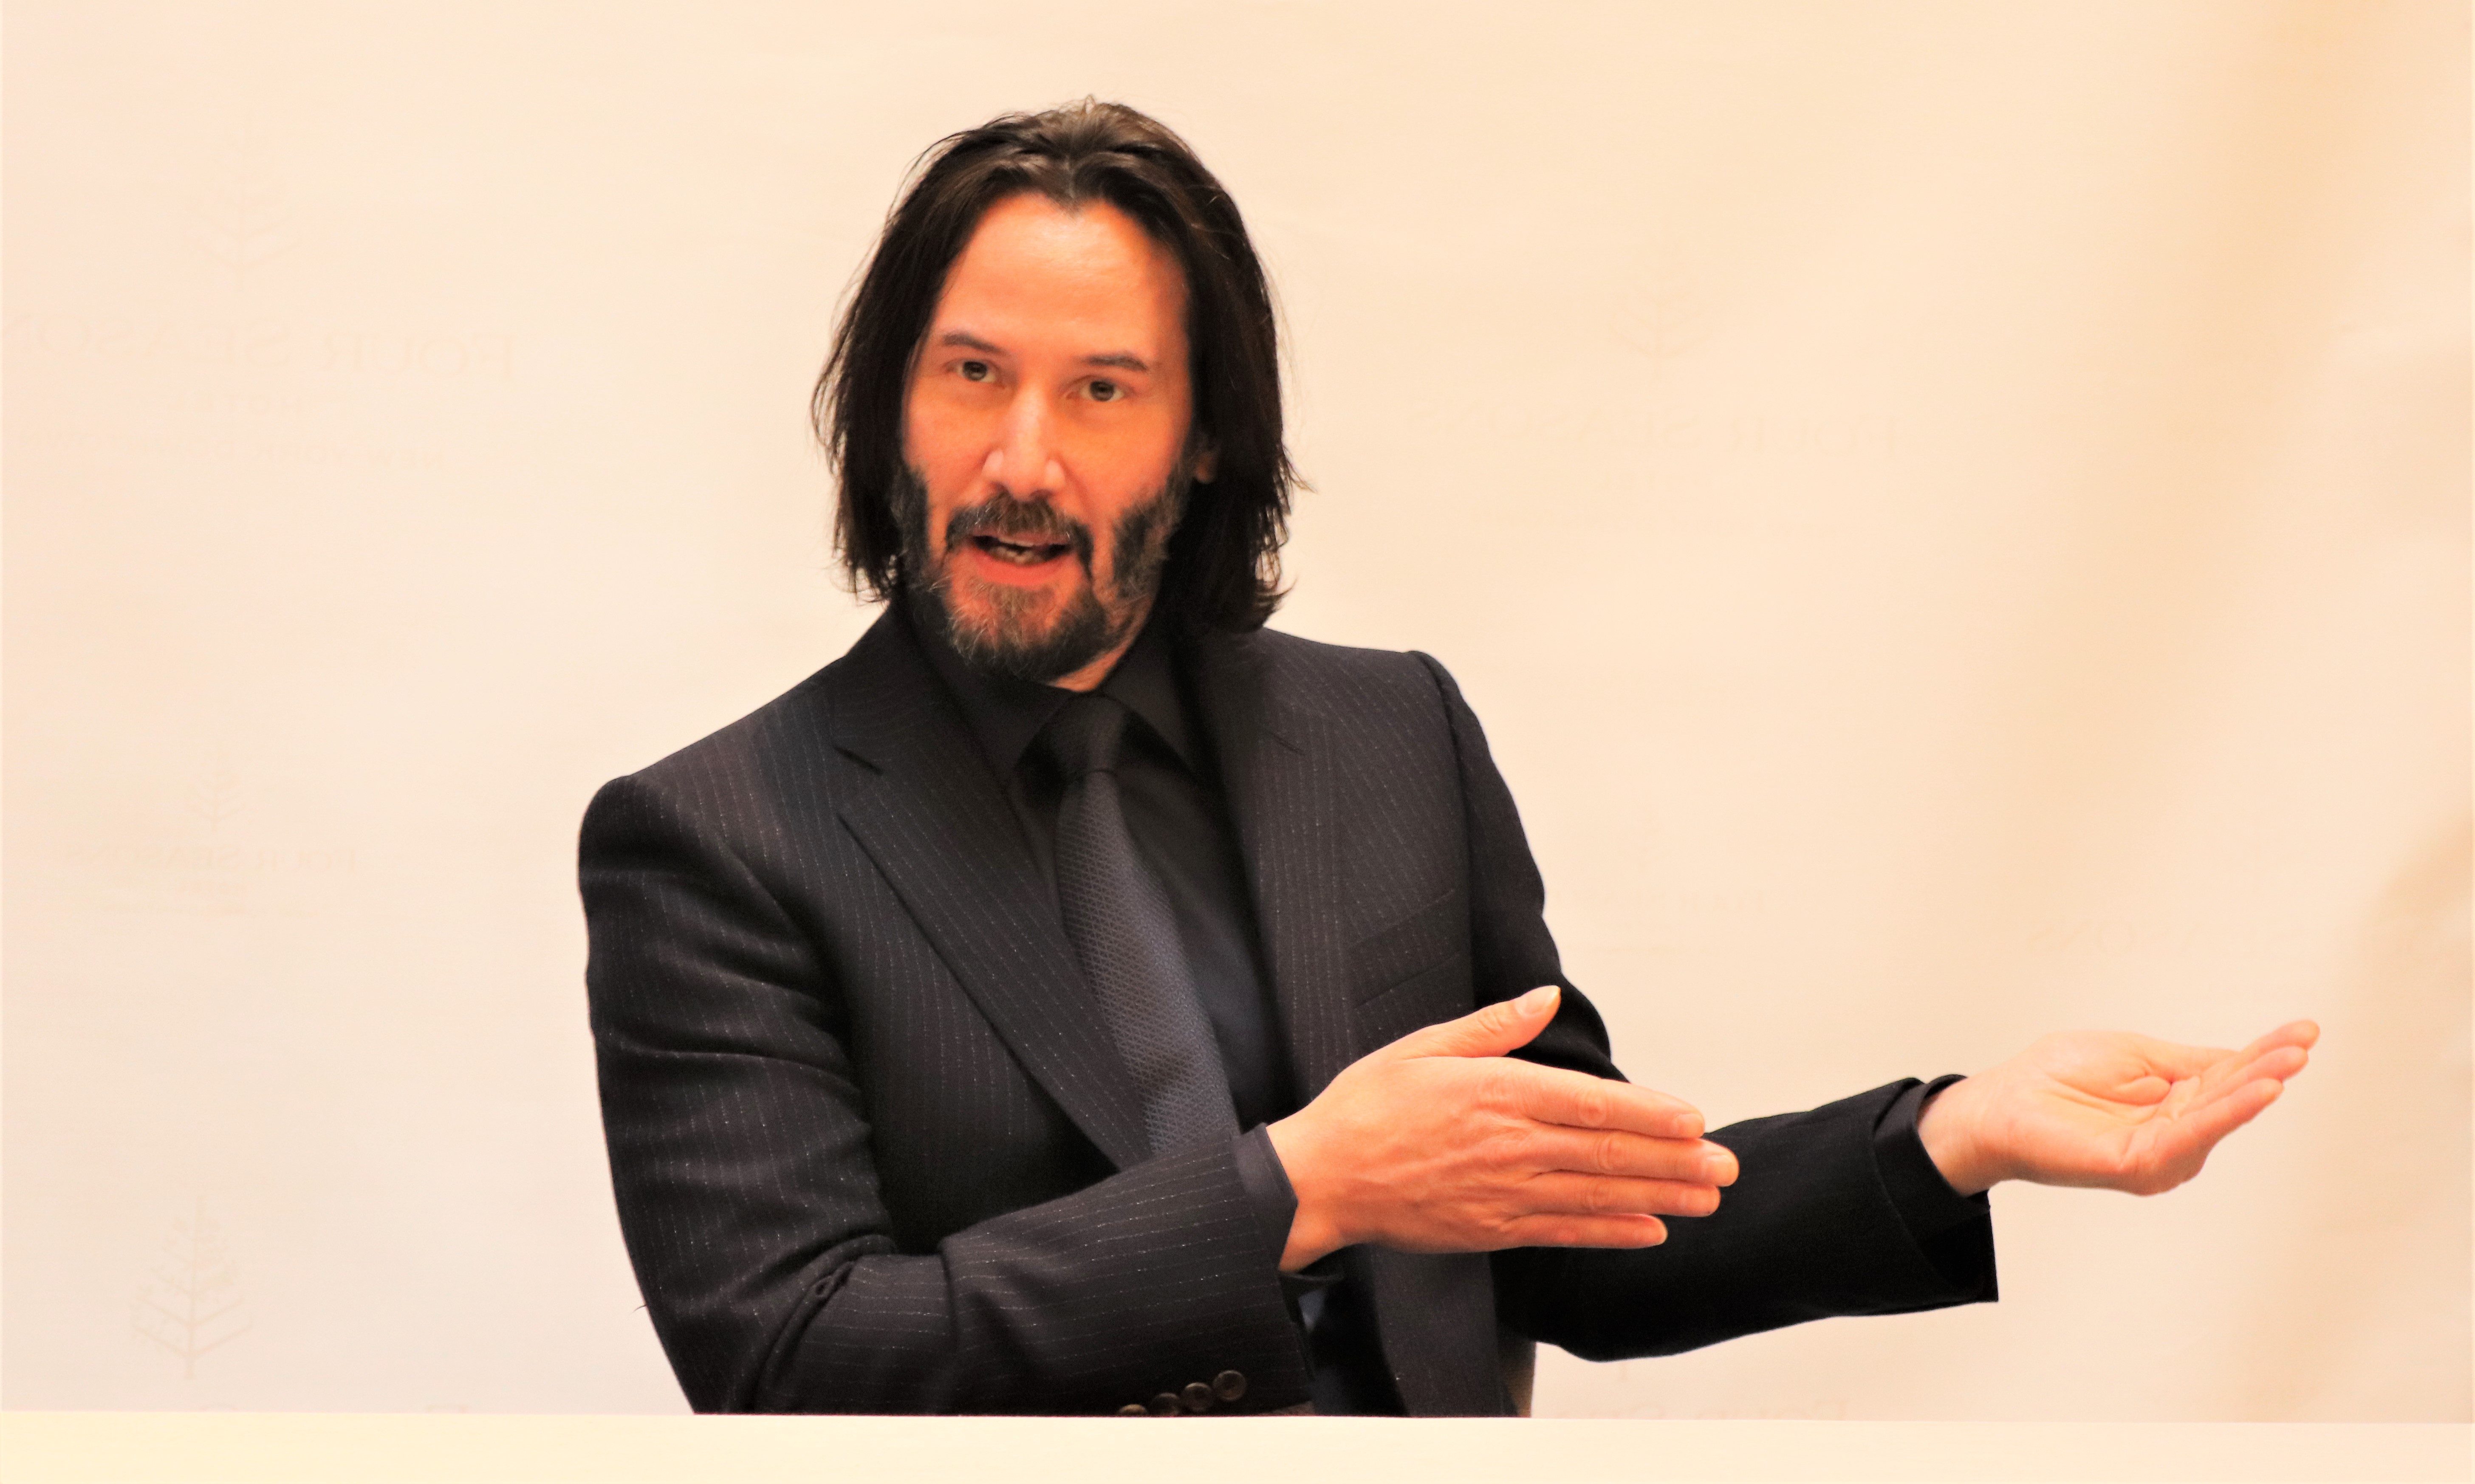 [Only IN Hollywood] Keanu Reeves talks about filming ‘The Matrix 4’ in Berlin